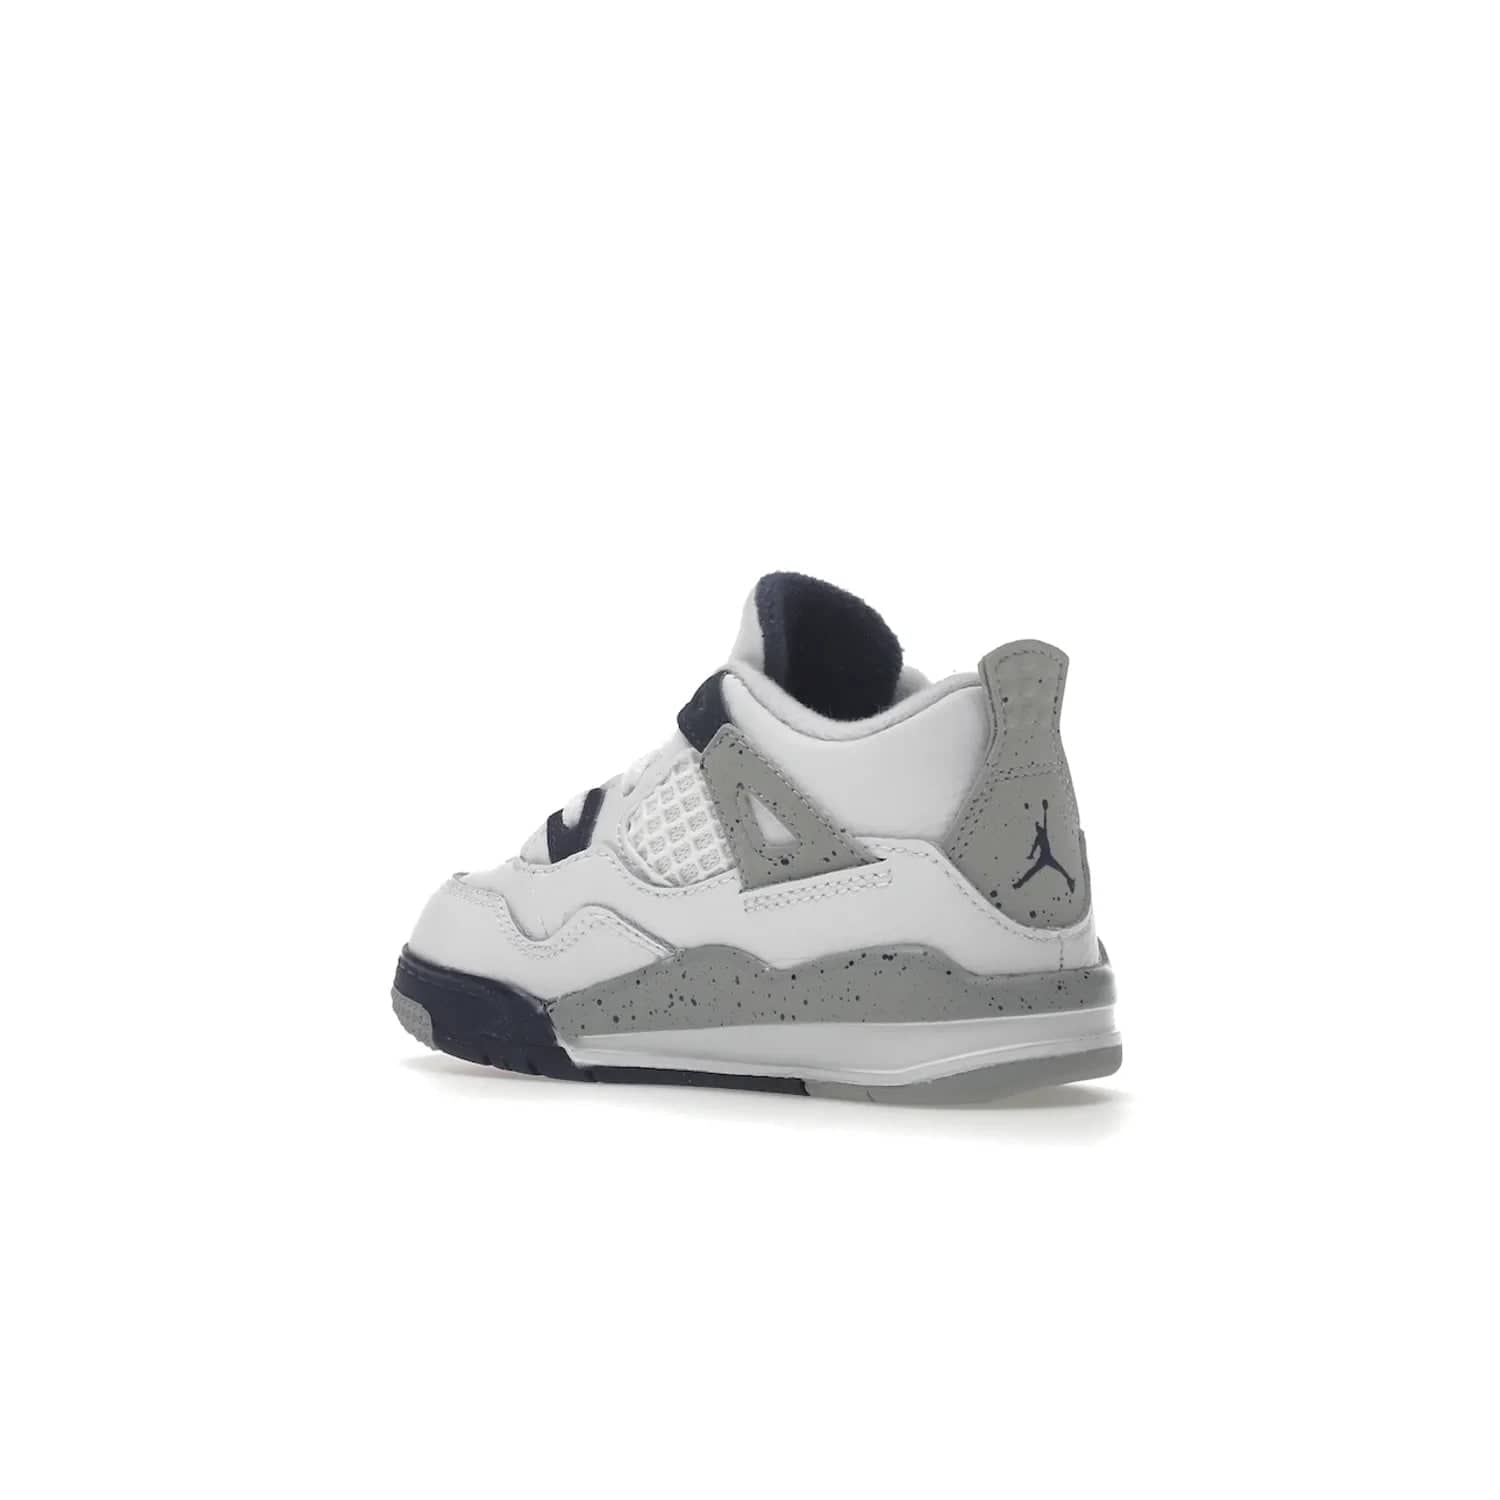 Jordan 4 Retro Midnight Navy (TD) - Image 23 - Only at www.BallersClubKickz.com - Introducing the Jordan 4 Retro Midnight Navy (TD) for kids. White leather upper with navy and grey accents plus fire red detailing. Perfect for everyday wear. Get yours before they sell out.